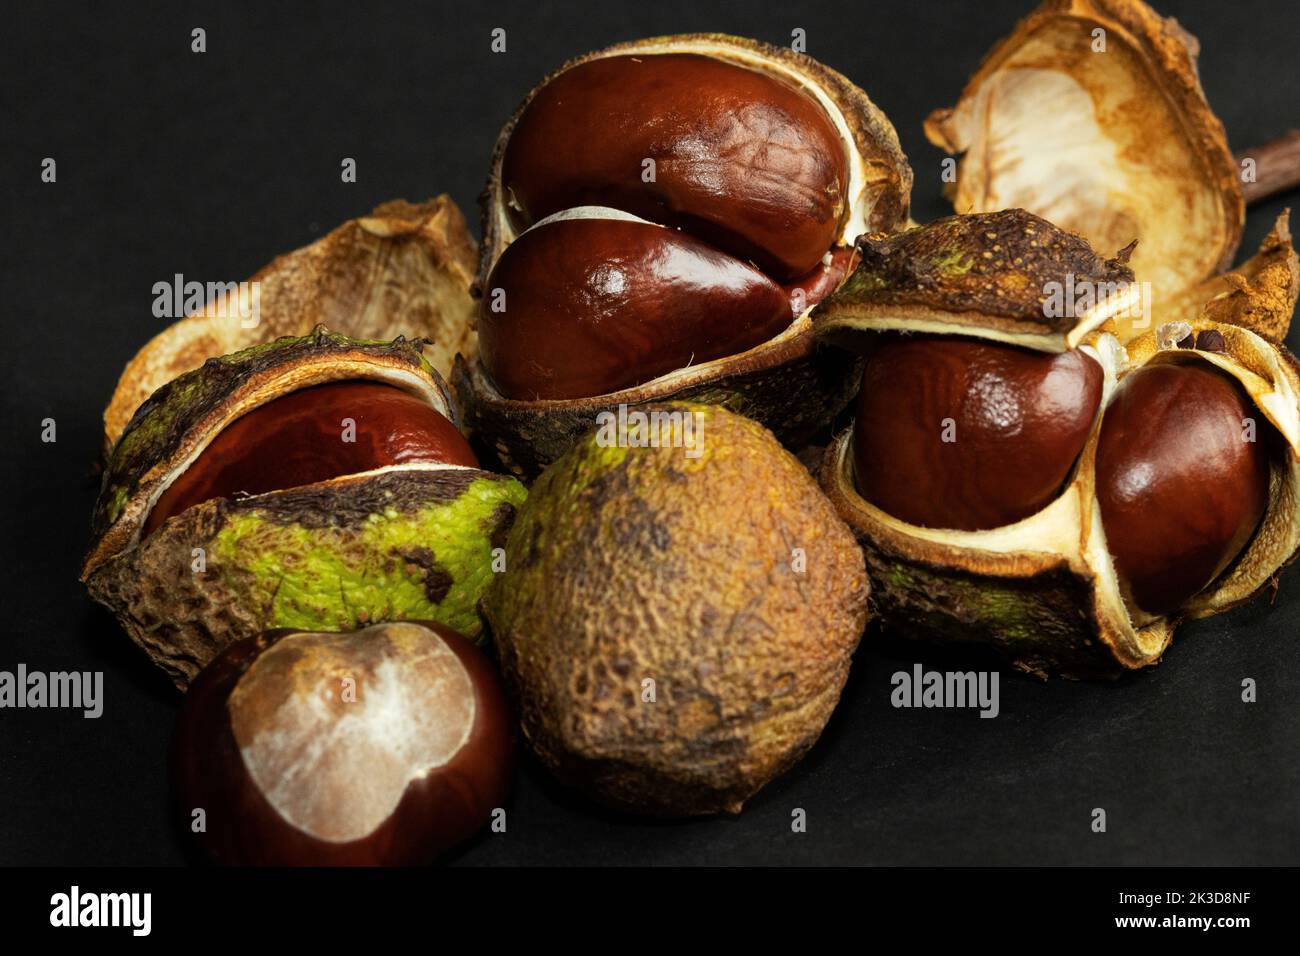 The dropping of their seed capsules by the Horsechestnut is a sign of autumn approaching. Countless generations of children have collected the Conkers Stock Photo